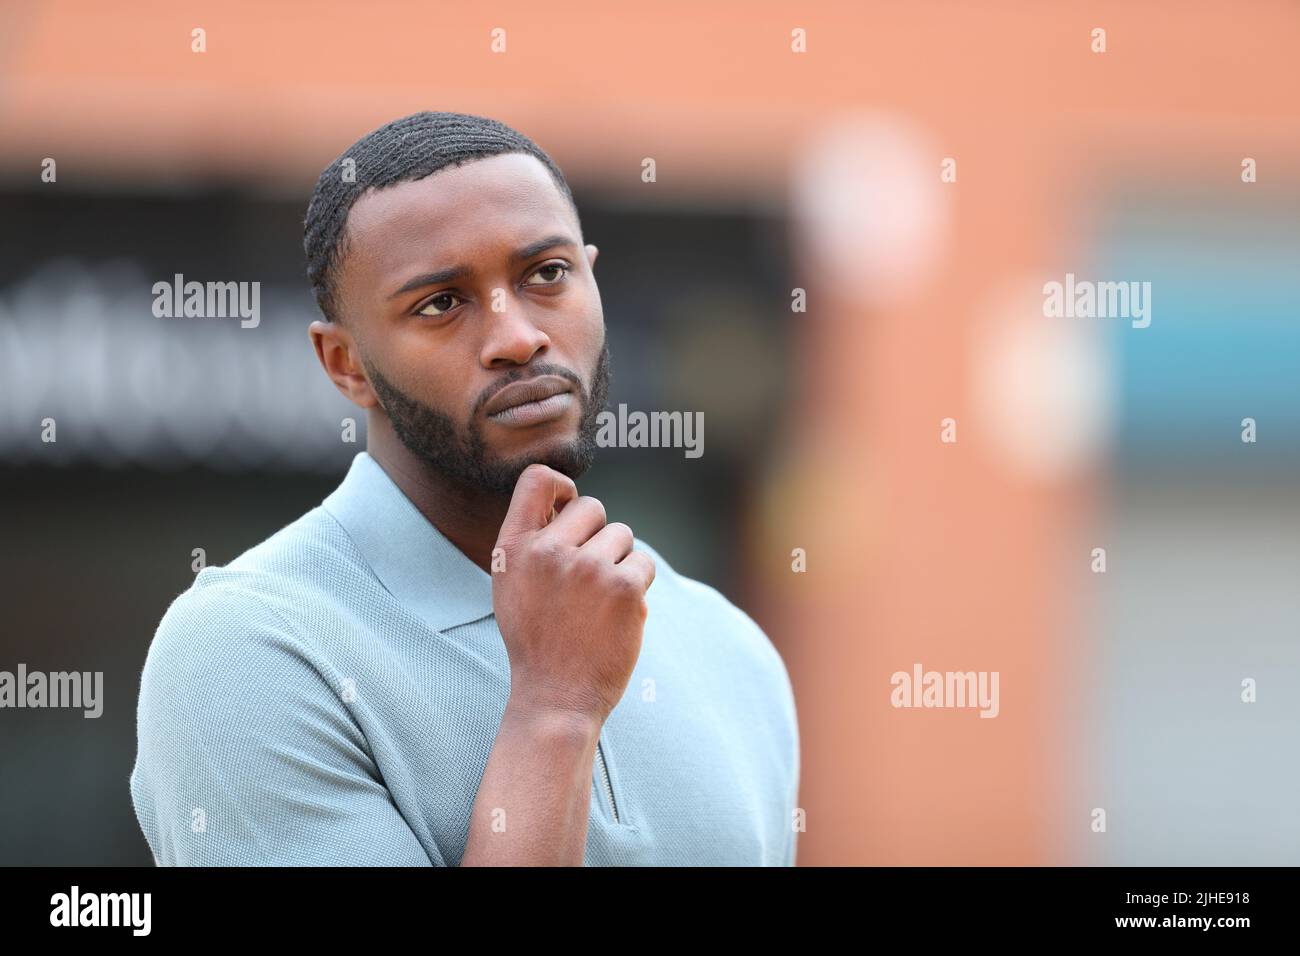 Serious black man thinking looking at side in the street Stock Photo